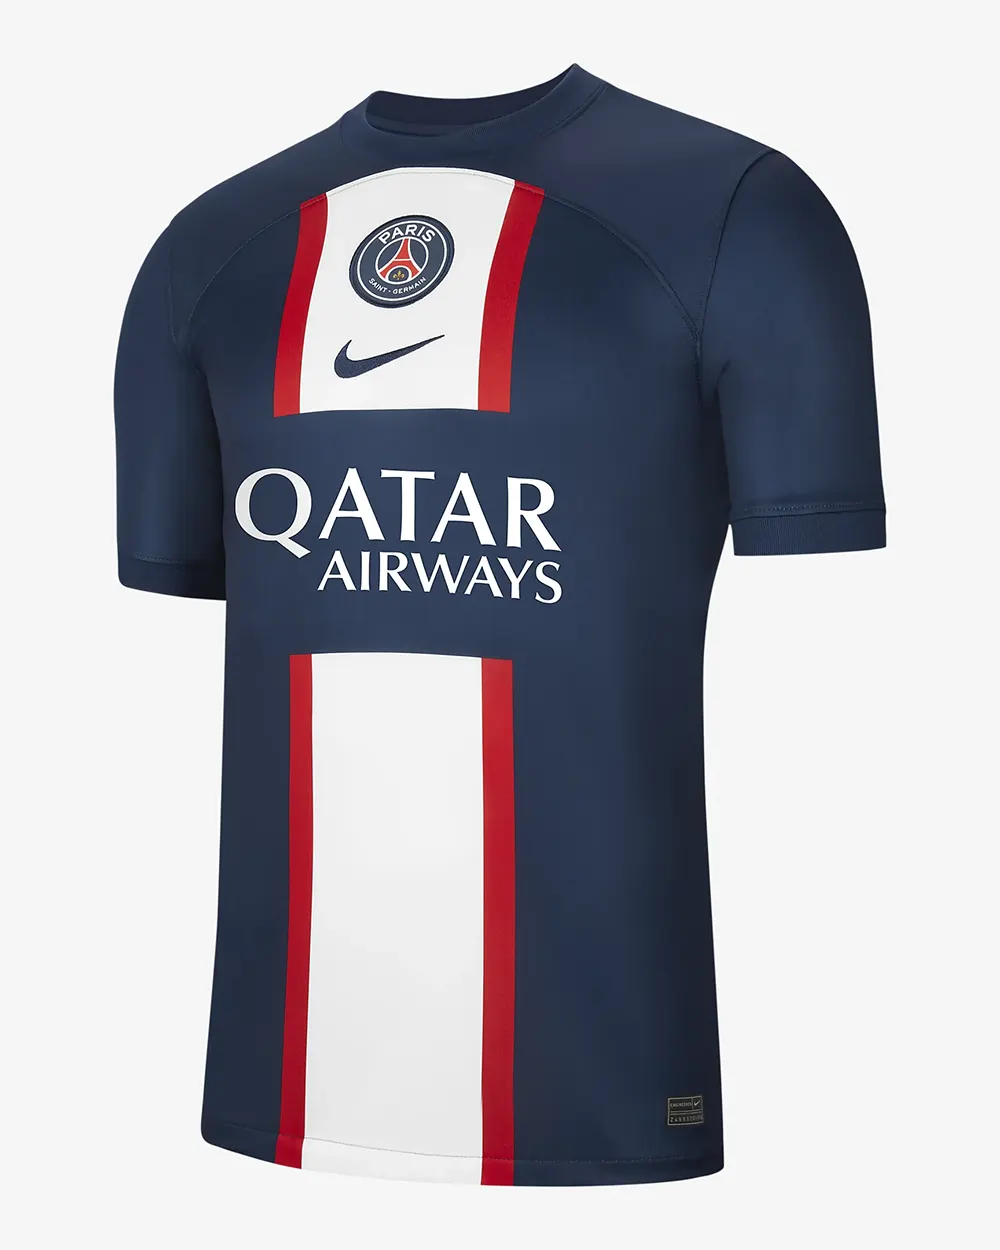 Classic Football Shirts on X: Inspired by PSG? Liverpool's new training  kits look to be inspired by kits used by PSG in the past. In 2006-07 PSG  wore a Louis Vuitton inspired